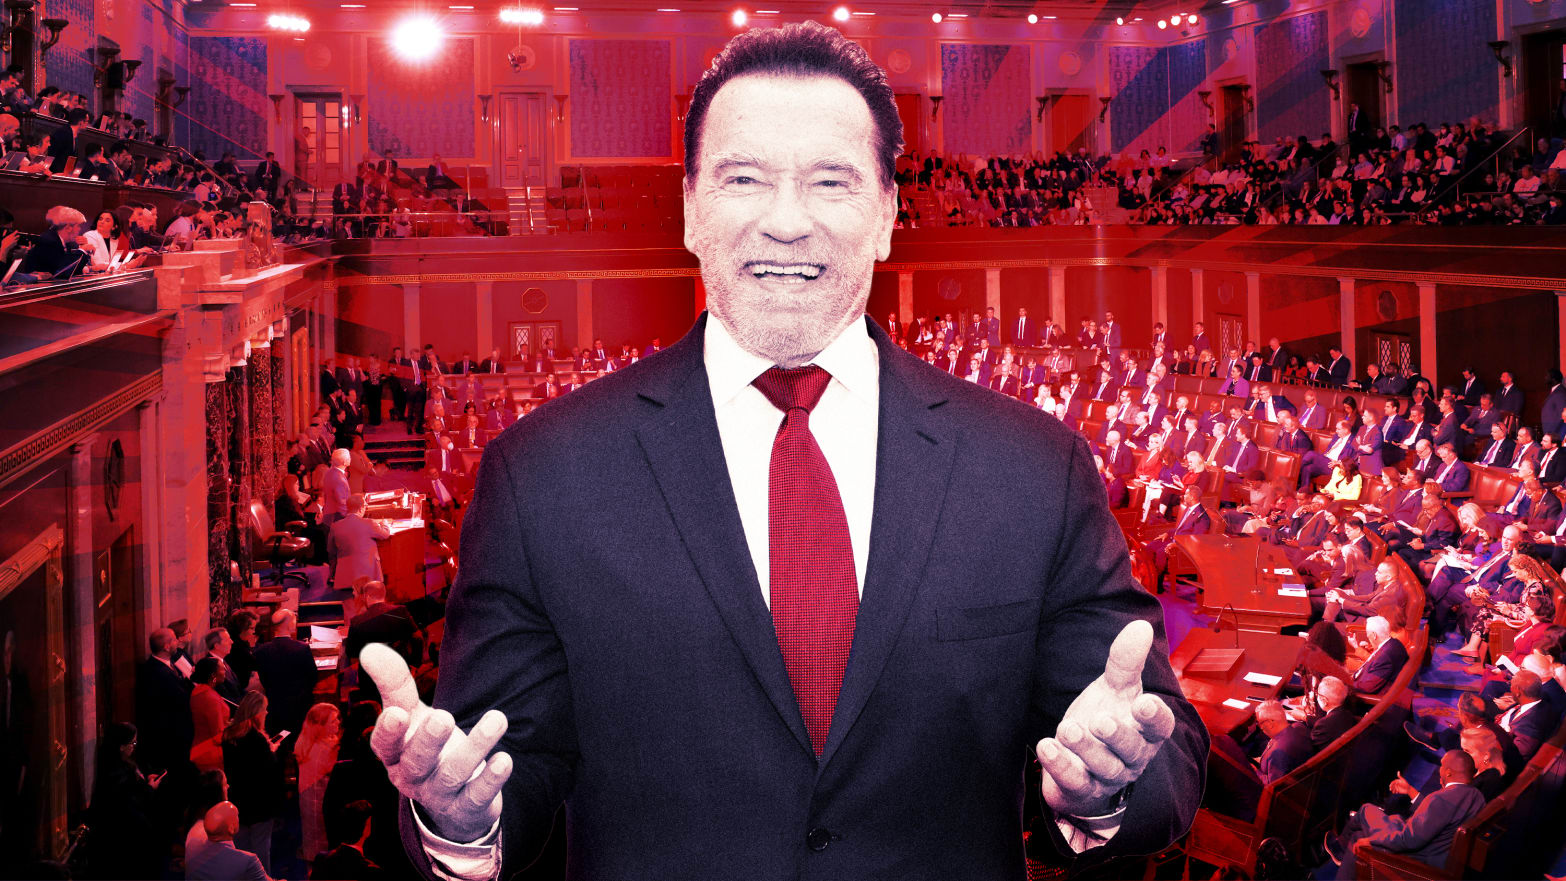 A photo illustration of Arnold Schwarzenegger and the House of Representatives.